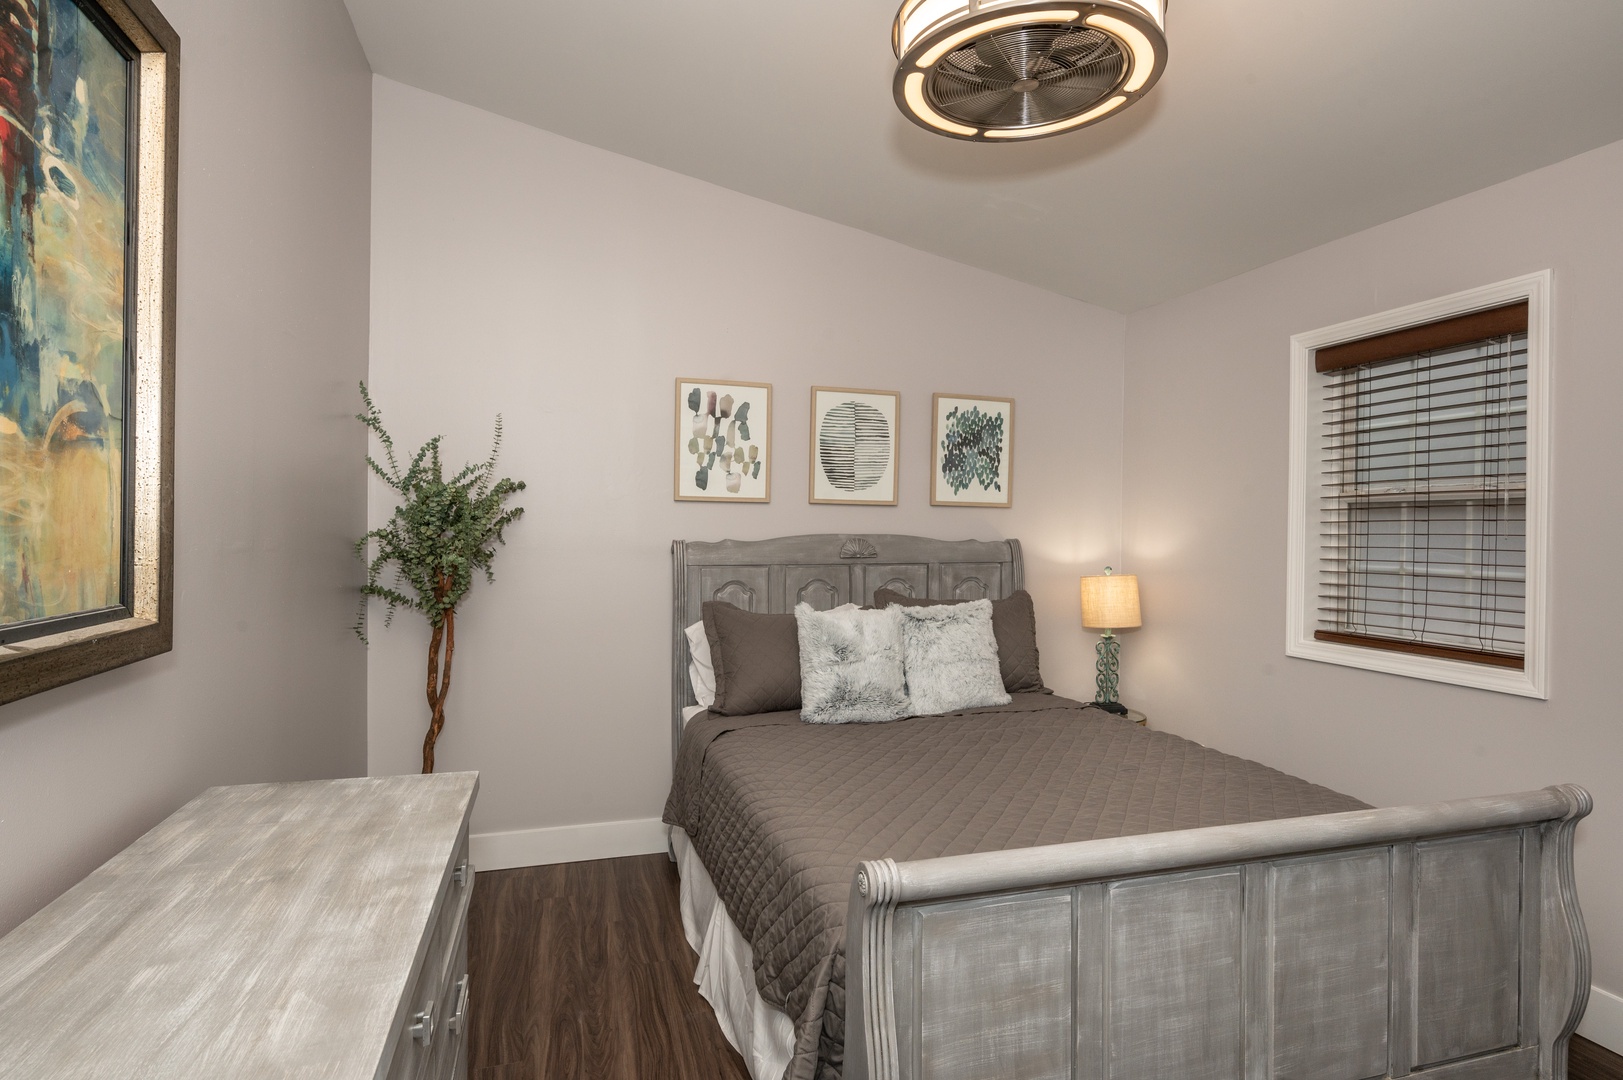 Apt 2 – The tranquil queen bedroom offers a ceiling fan & dresser